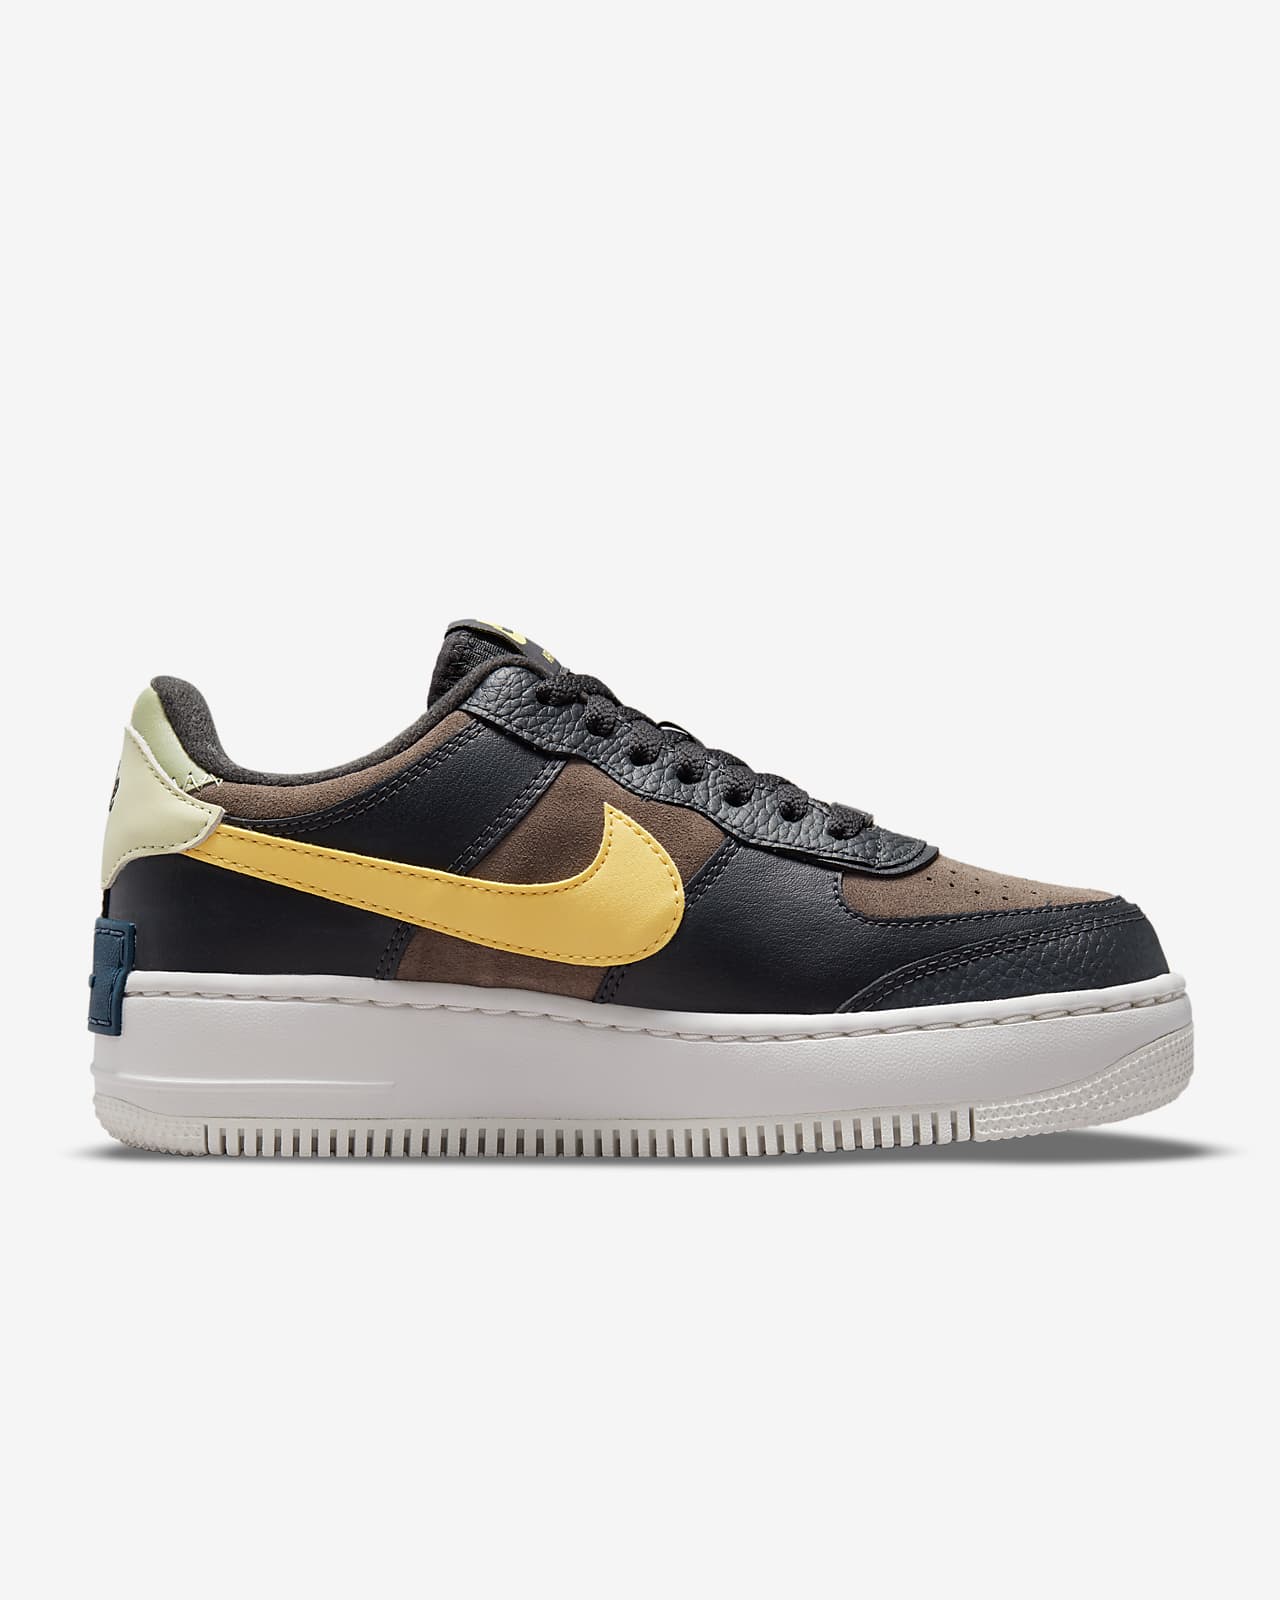 chaussure nike femme air force 1 or